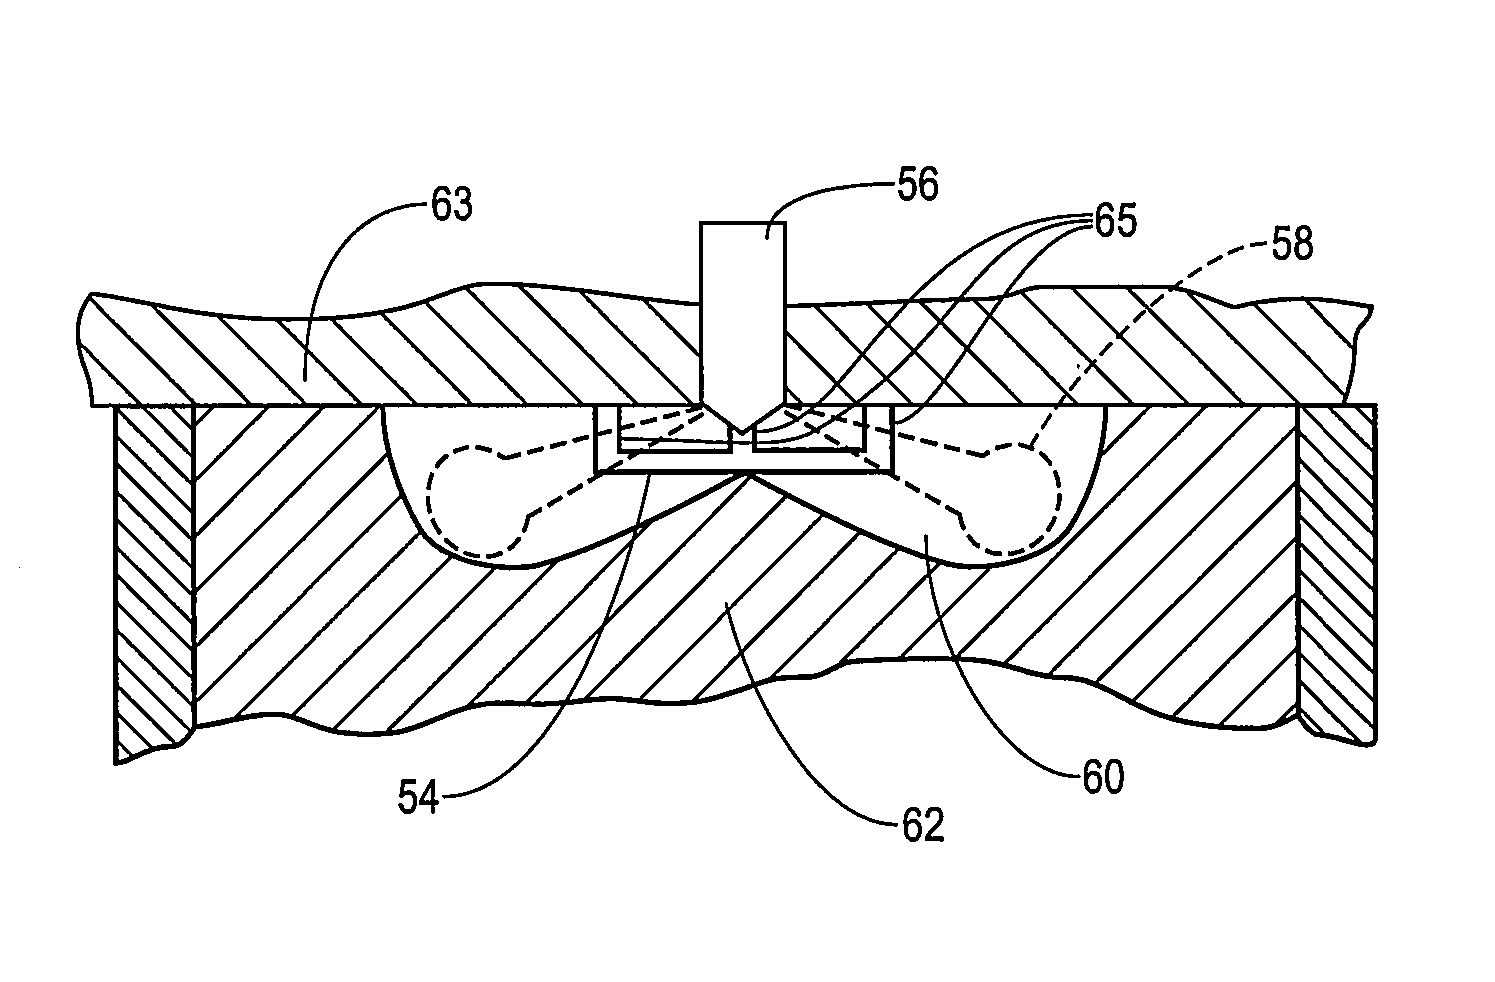 Direct injection combustion chamber geometry